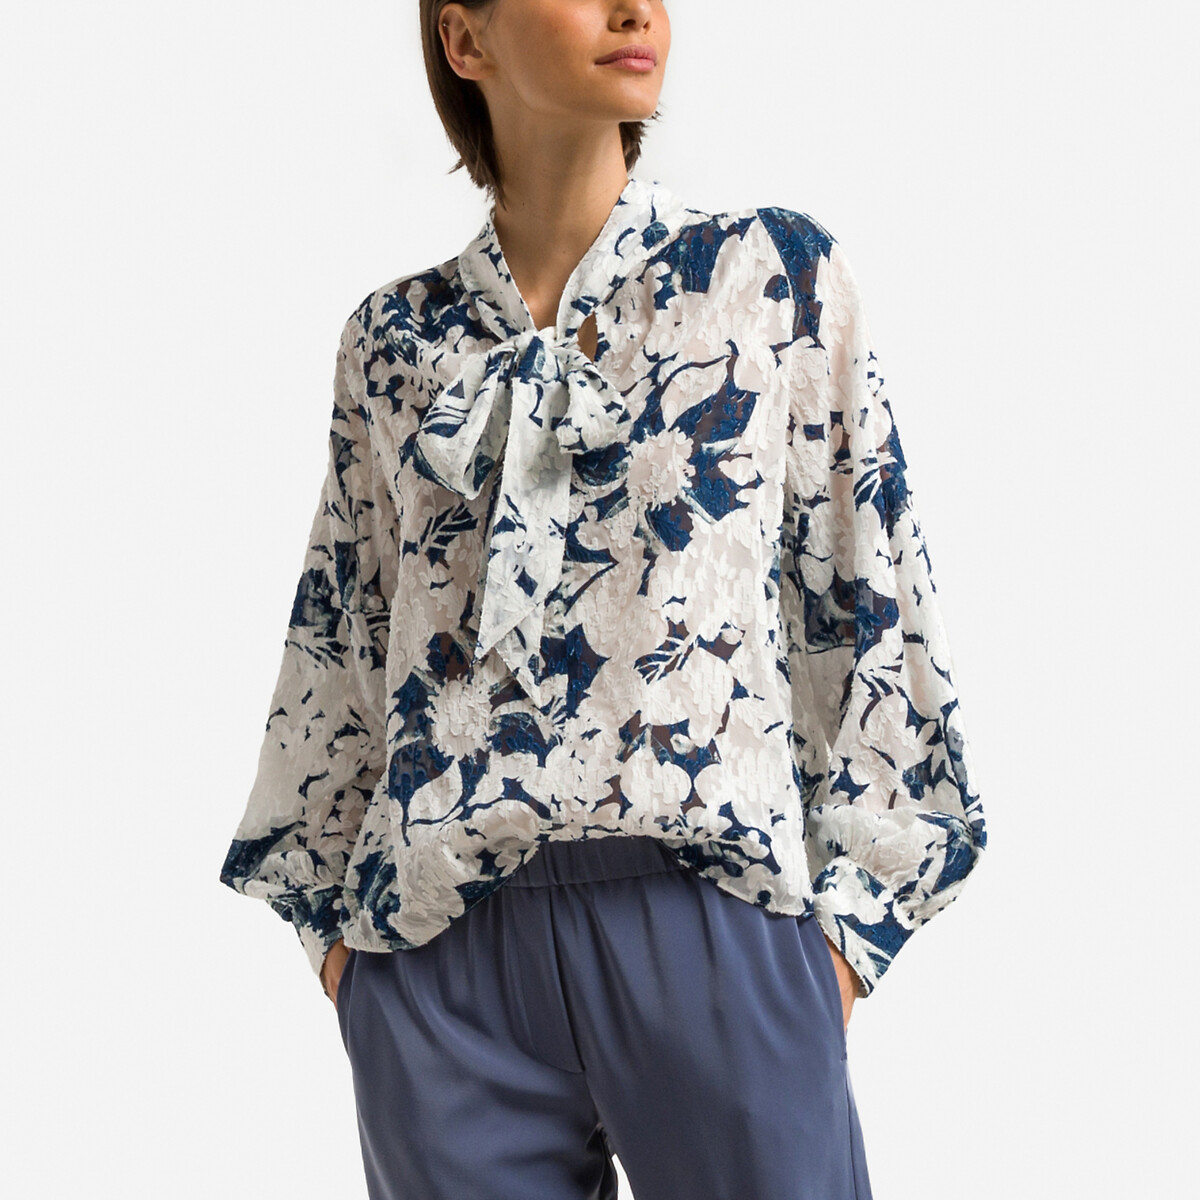 Ebbali Graphic Print Blouse with Pussy Bow